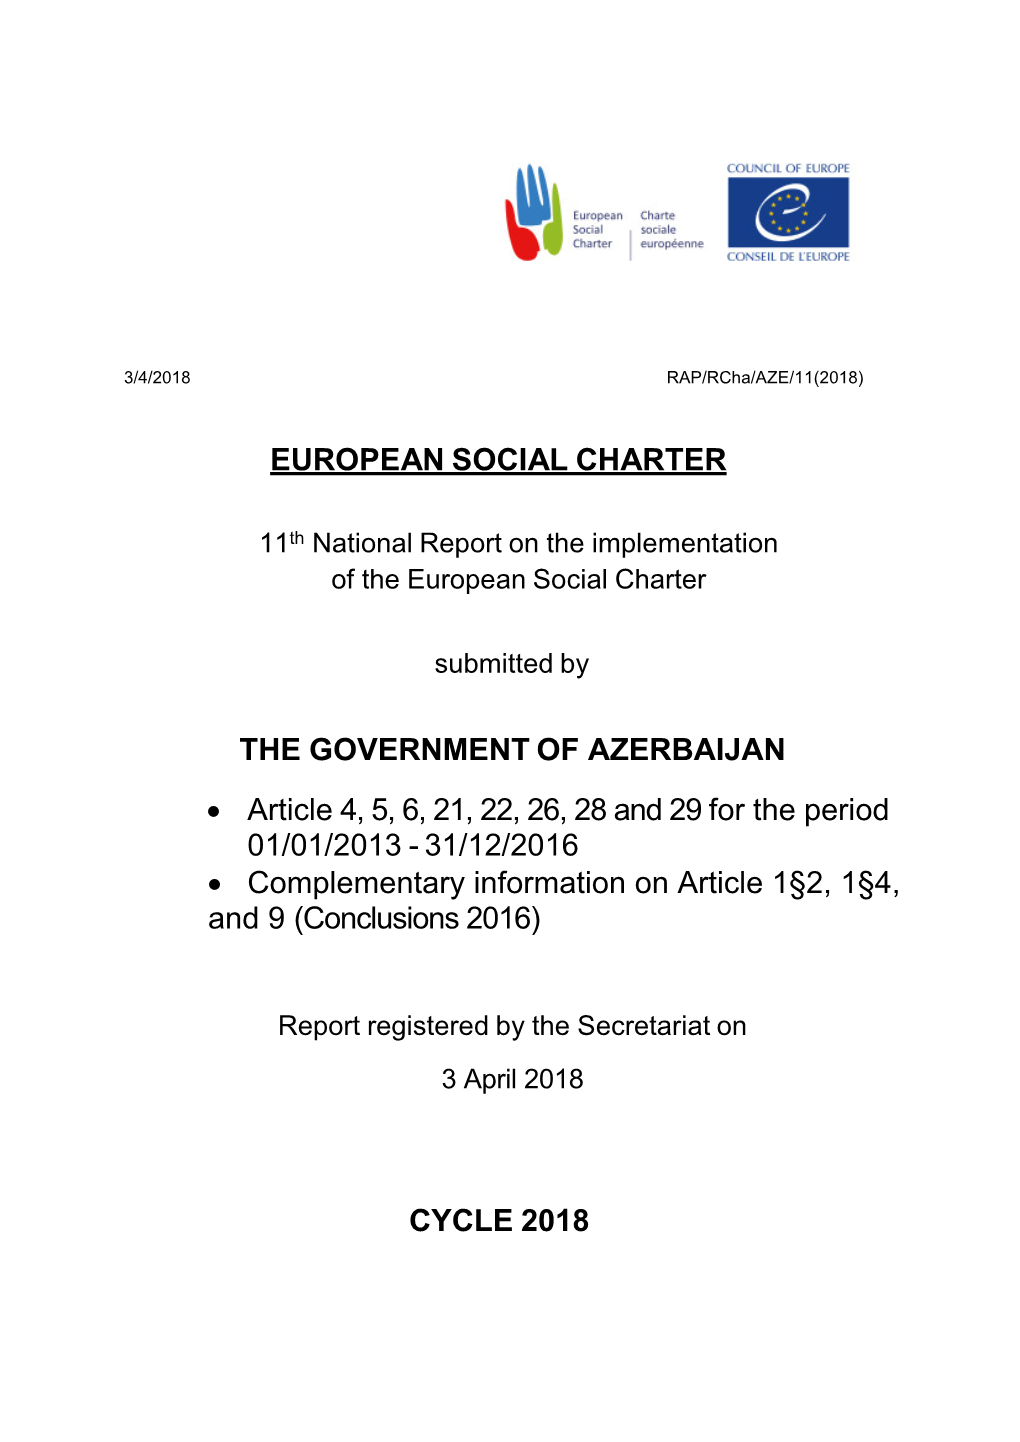 EUROPEAN SOCIAL CHARTER the GOVERNMENT of AZERBAIJAN • Article 4, 5, 6, 21, 22, 26, 28 and 29 for the Period 01/01/2013